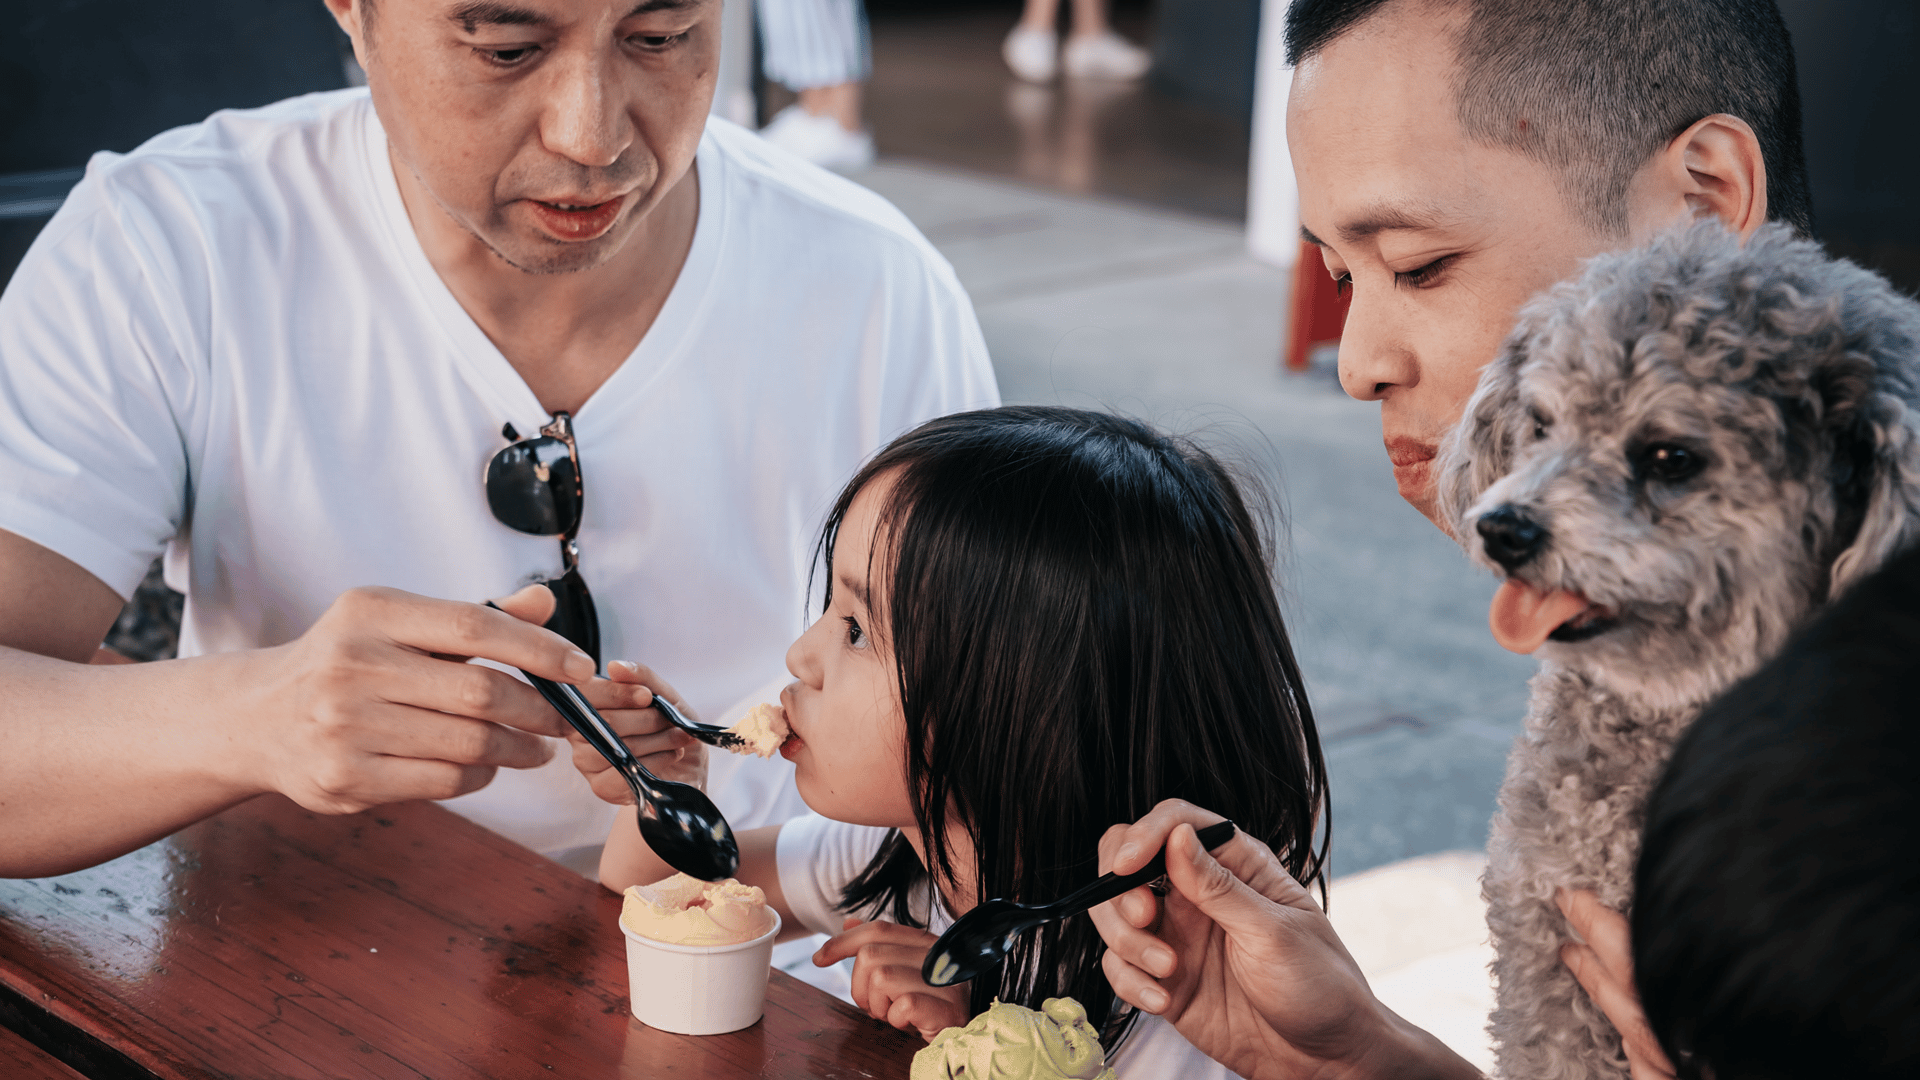 Family eating ice cream with child and dog at table